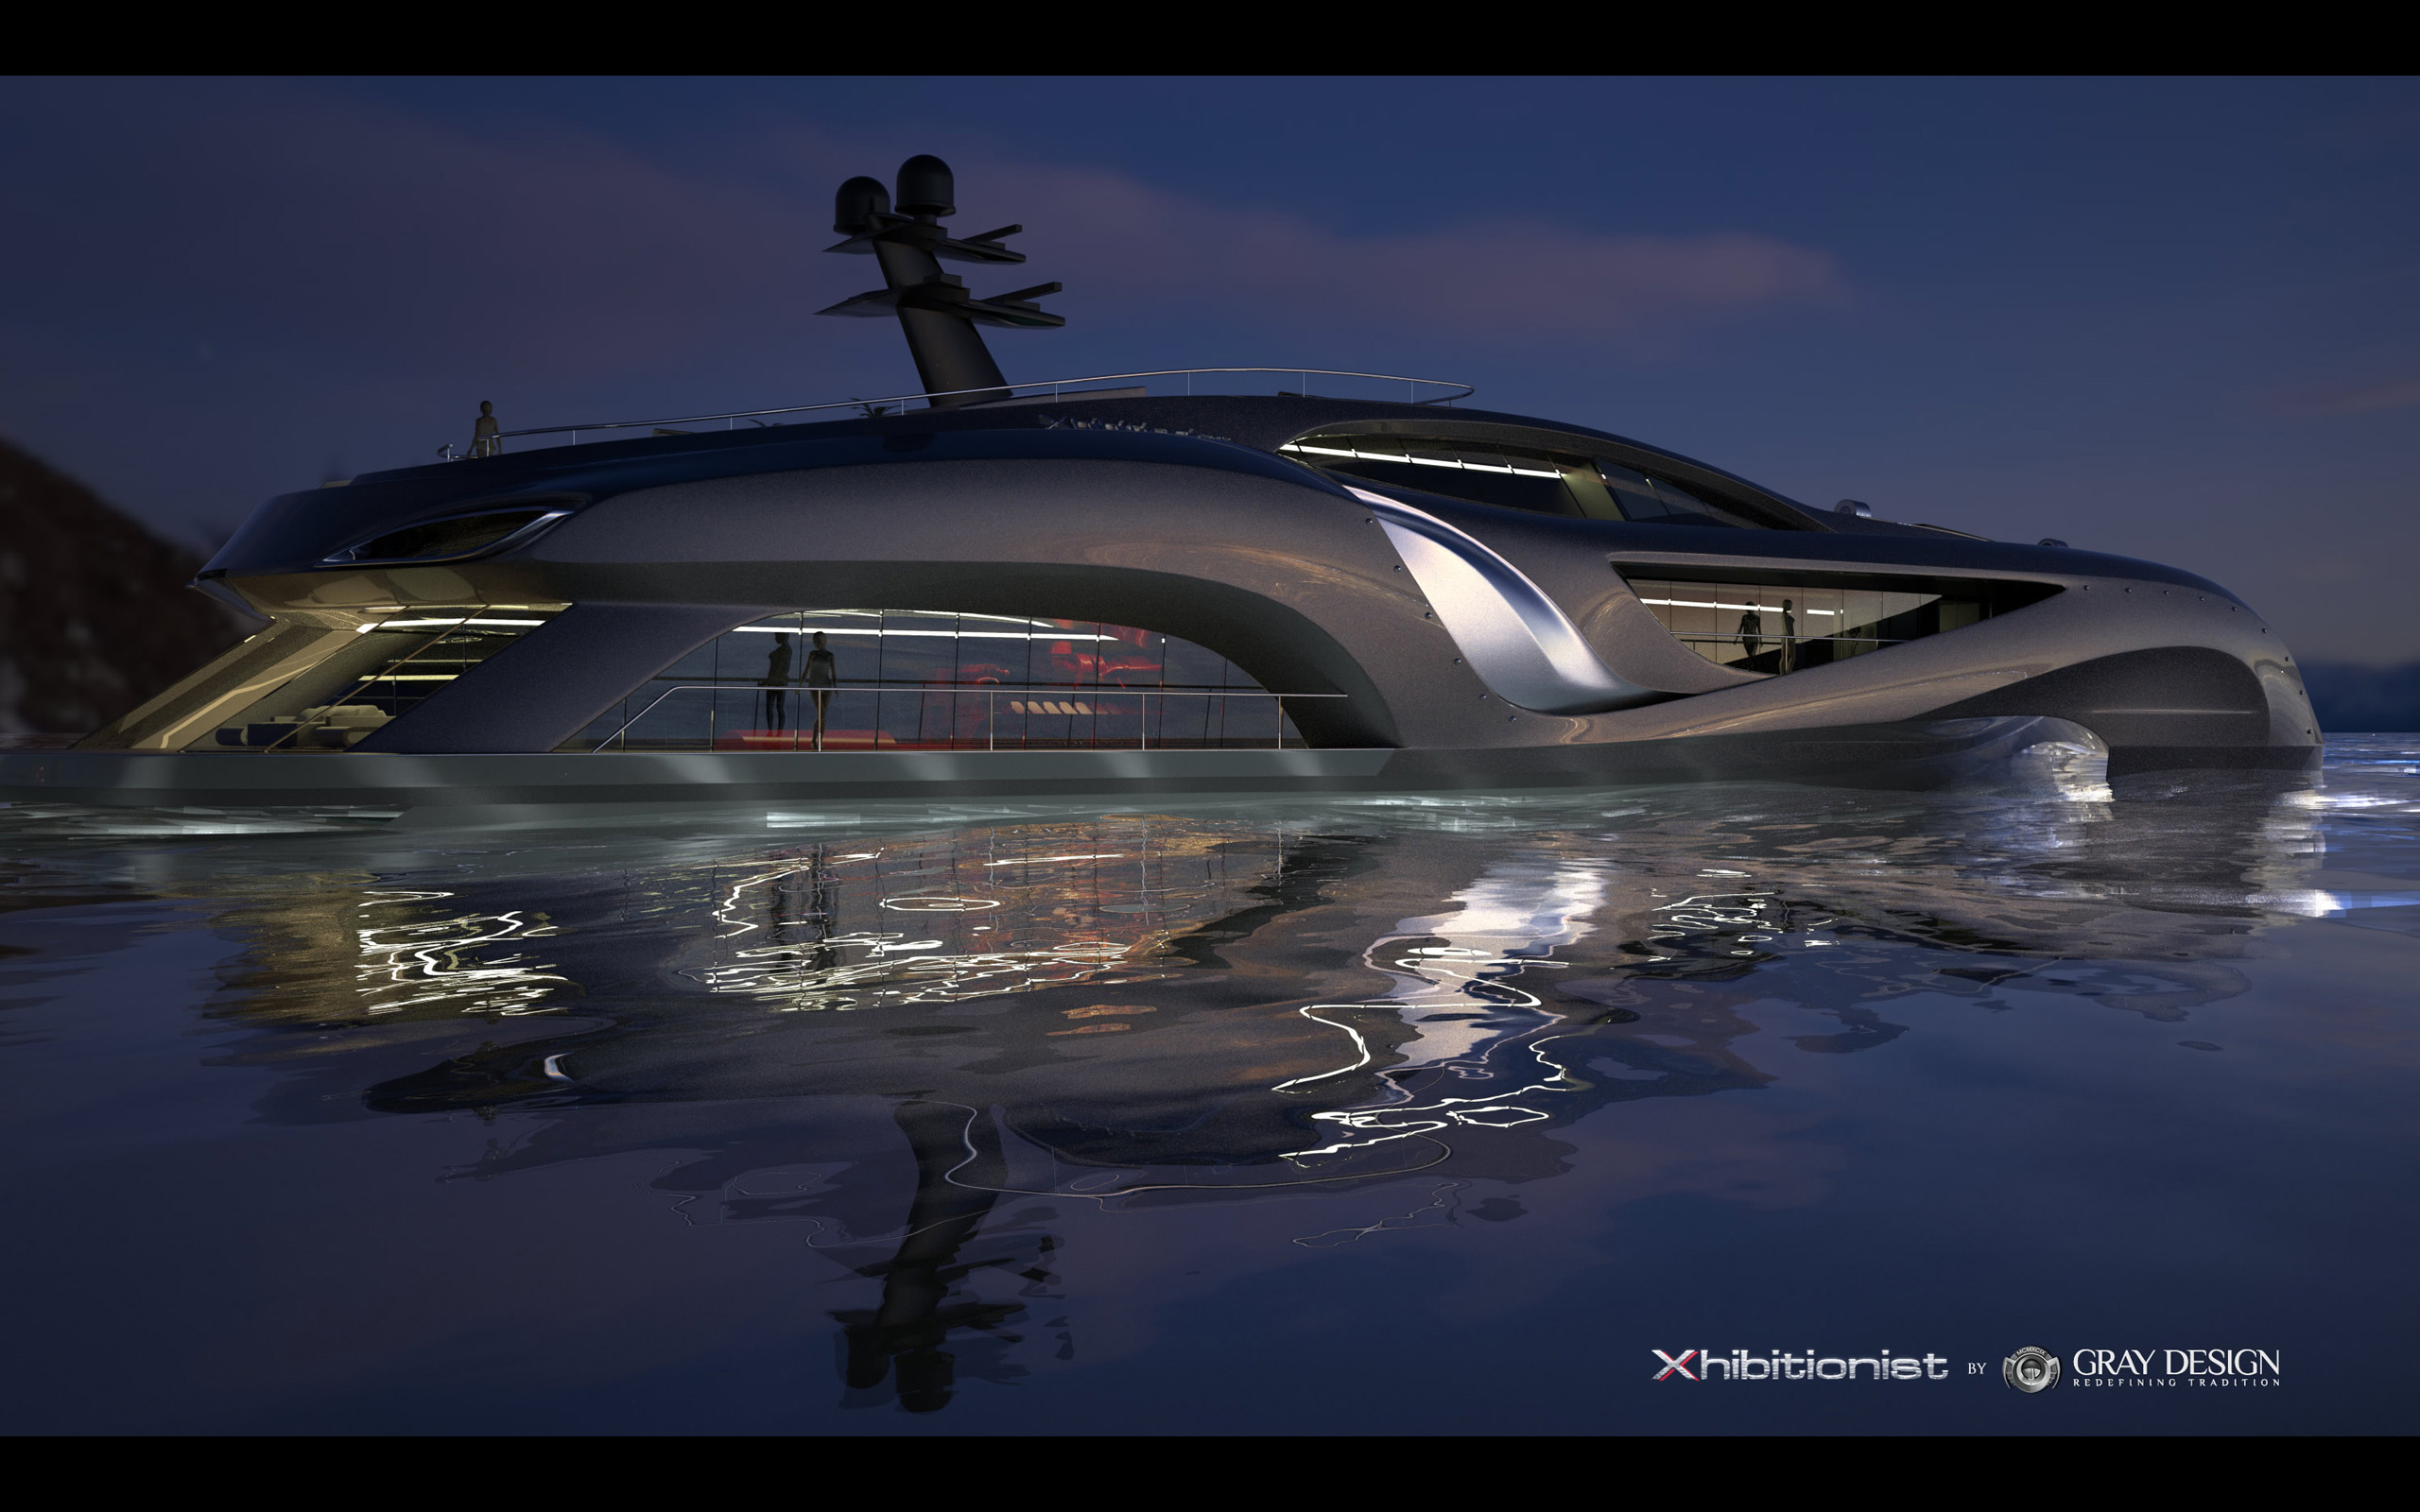 Yacht Concept Boat Boats Ship Ships Luxury Wallpaper Background